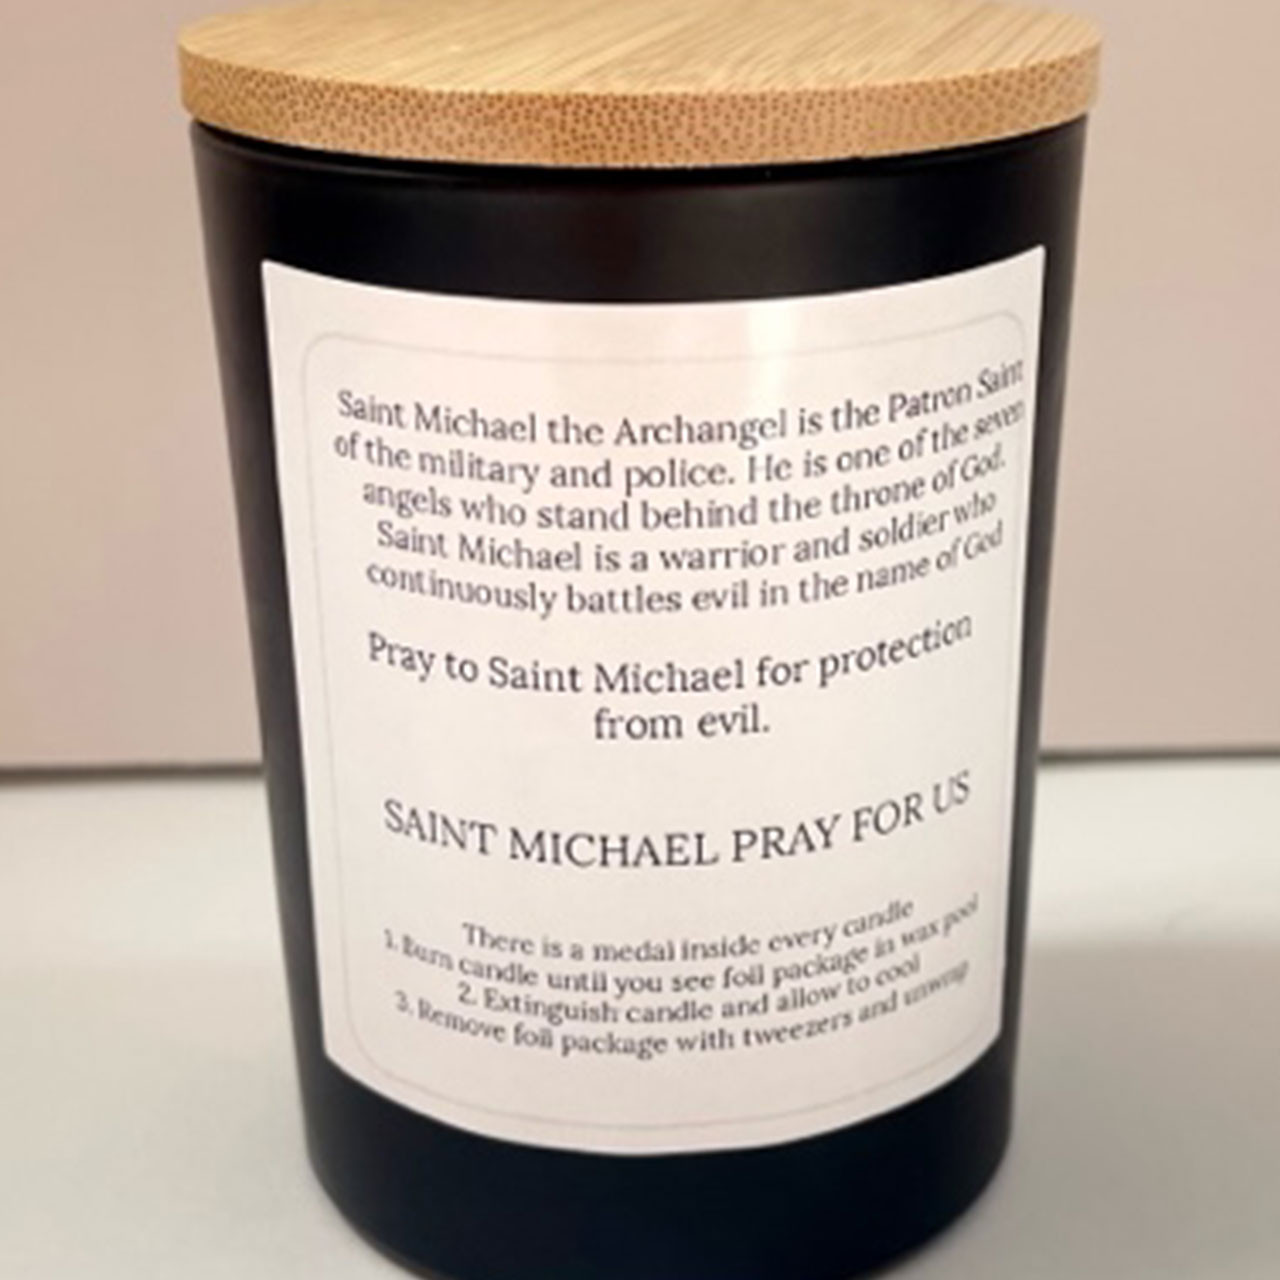 Back label of the Soy Saint Michael Candle with Medal